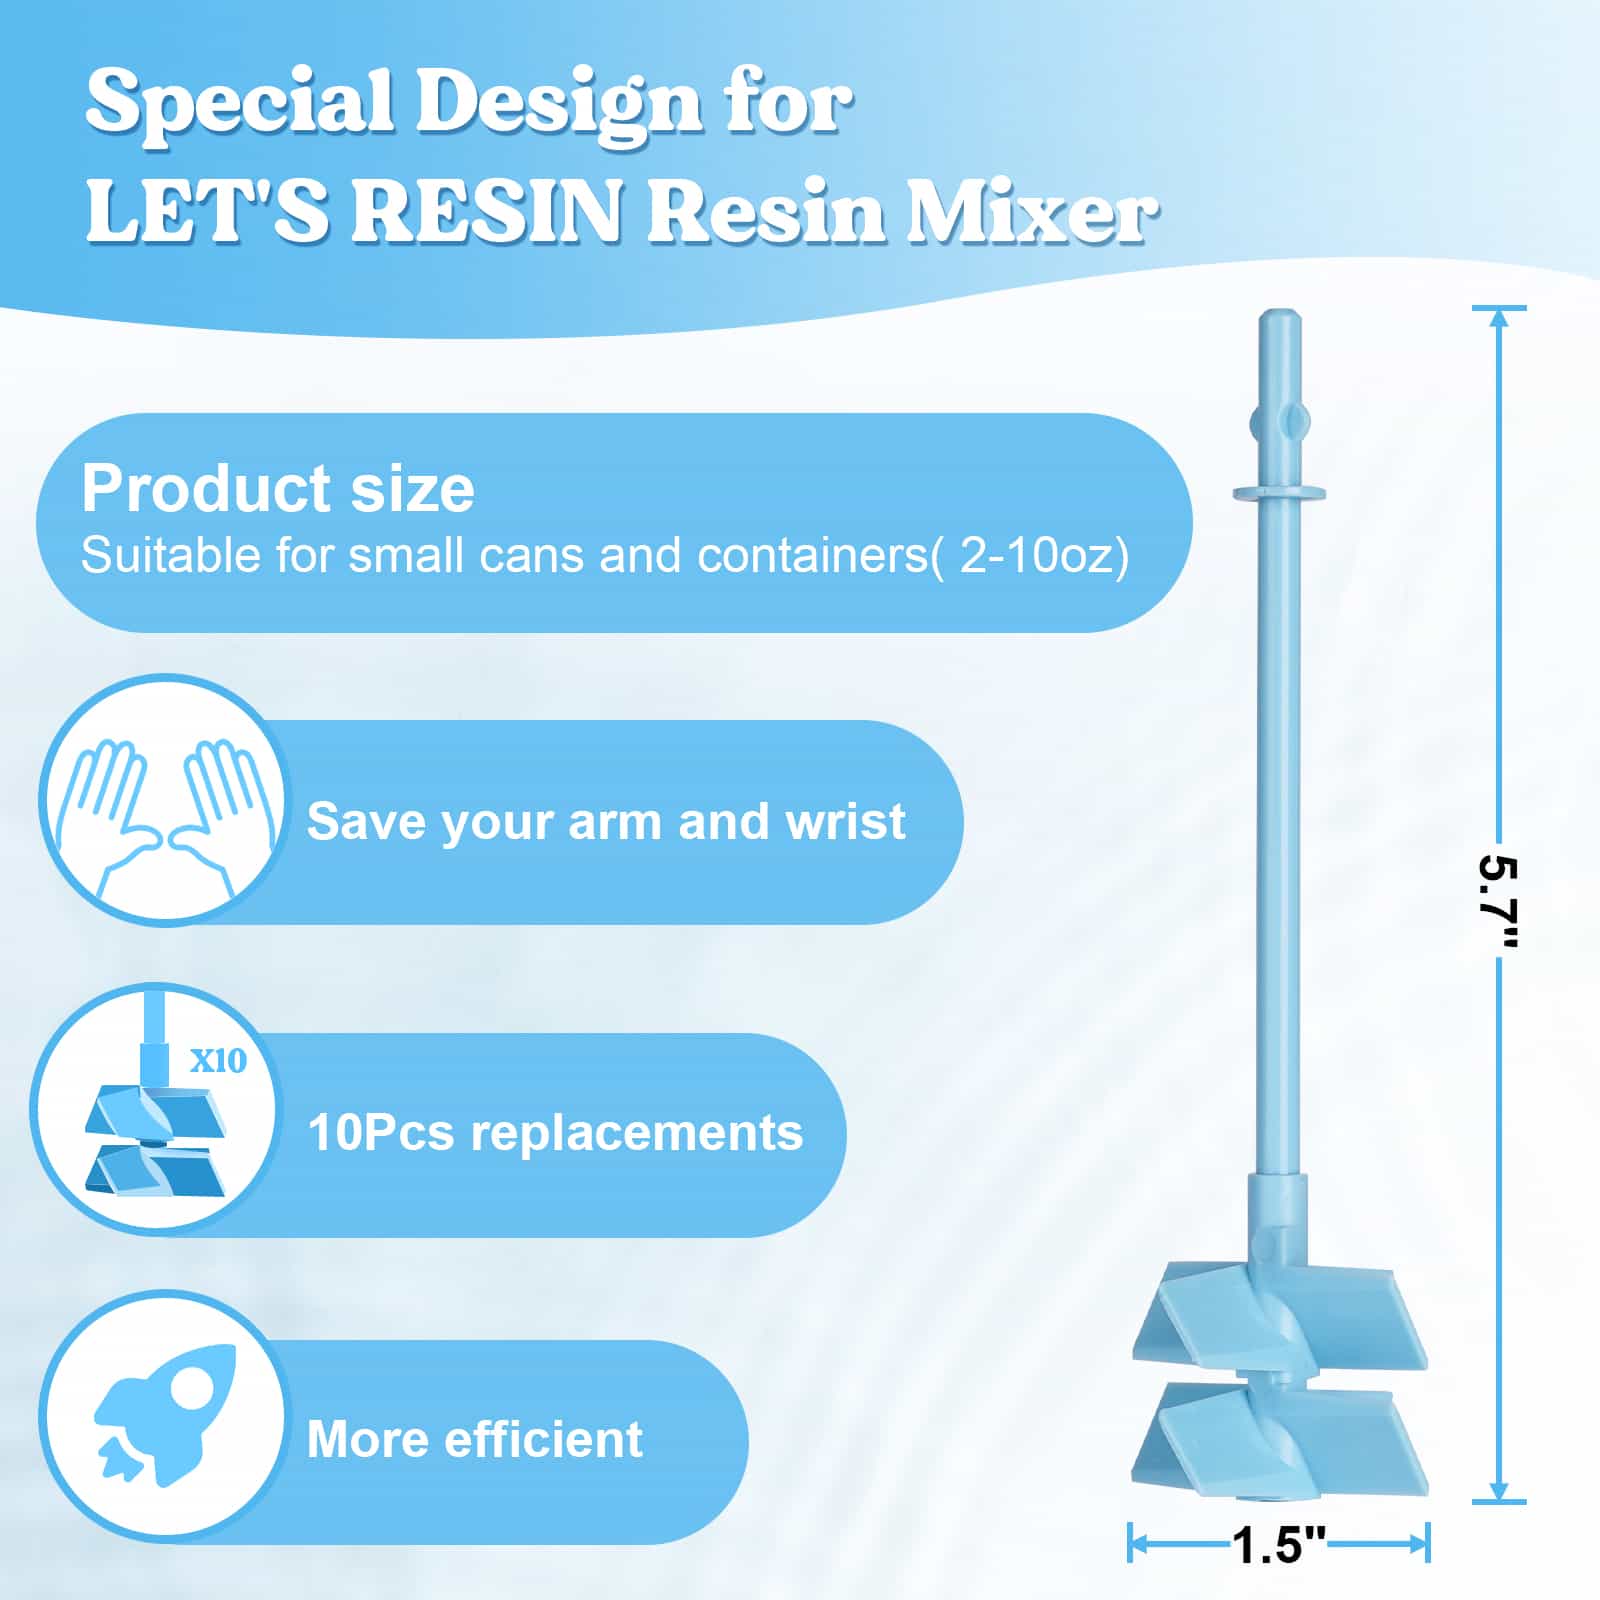 resin mixer paddles with 10pcs replacements are suitable for 2-10oz cans, save your arm and wrist